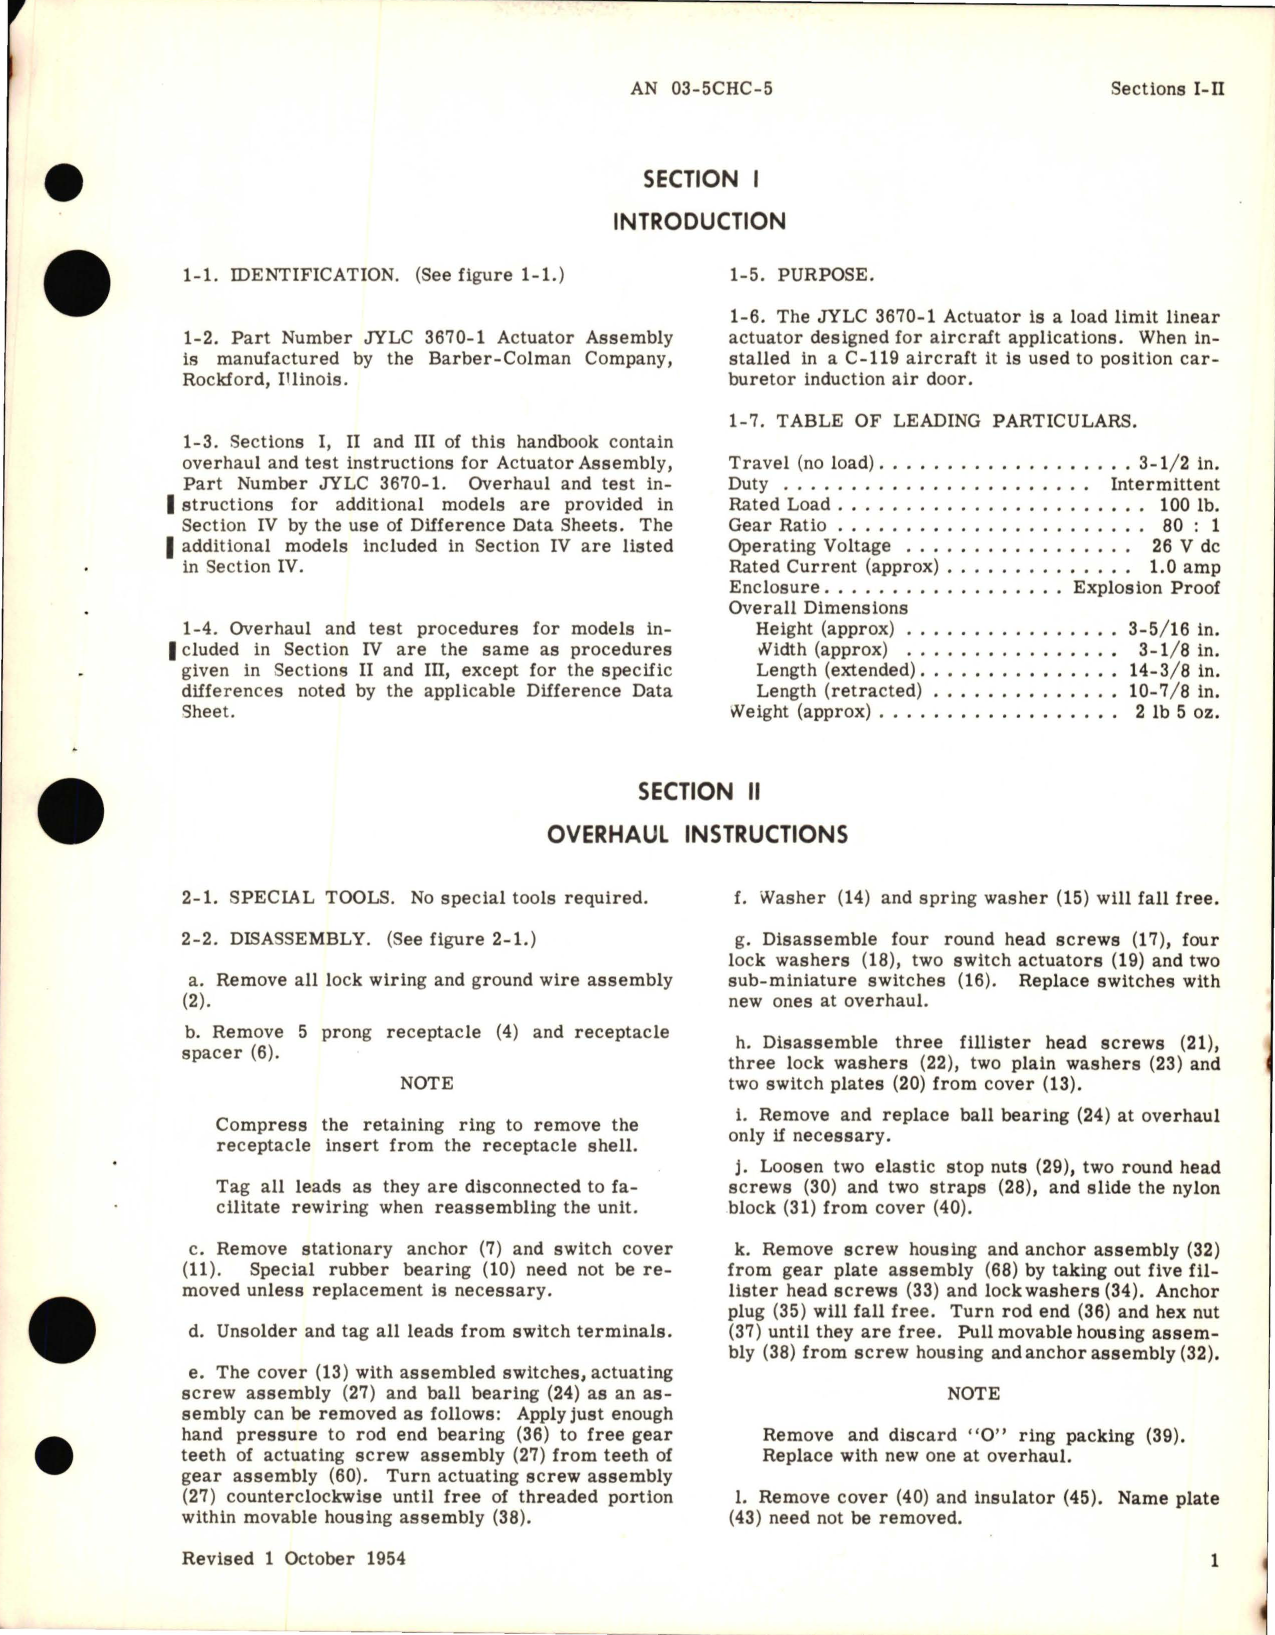 Sample page 5 from AirCorps Library document: Overhaul Instructions for Aircraft Actuators